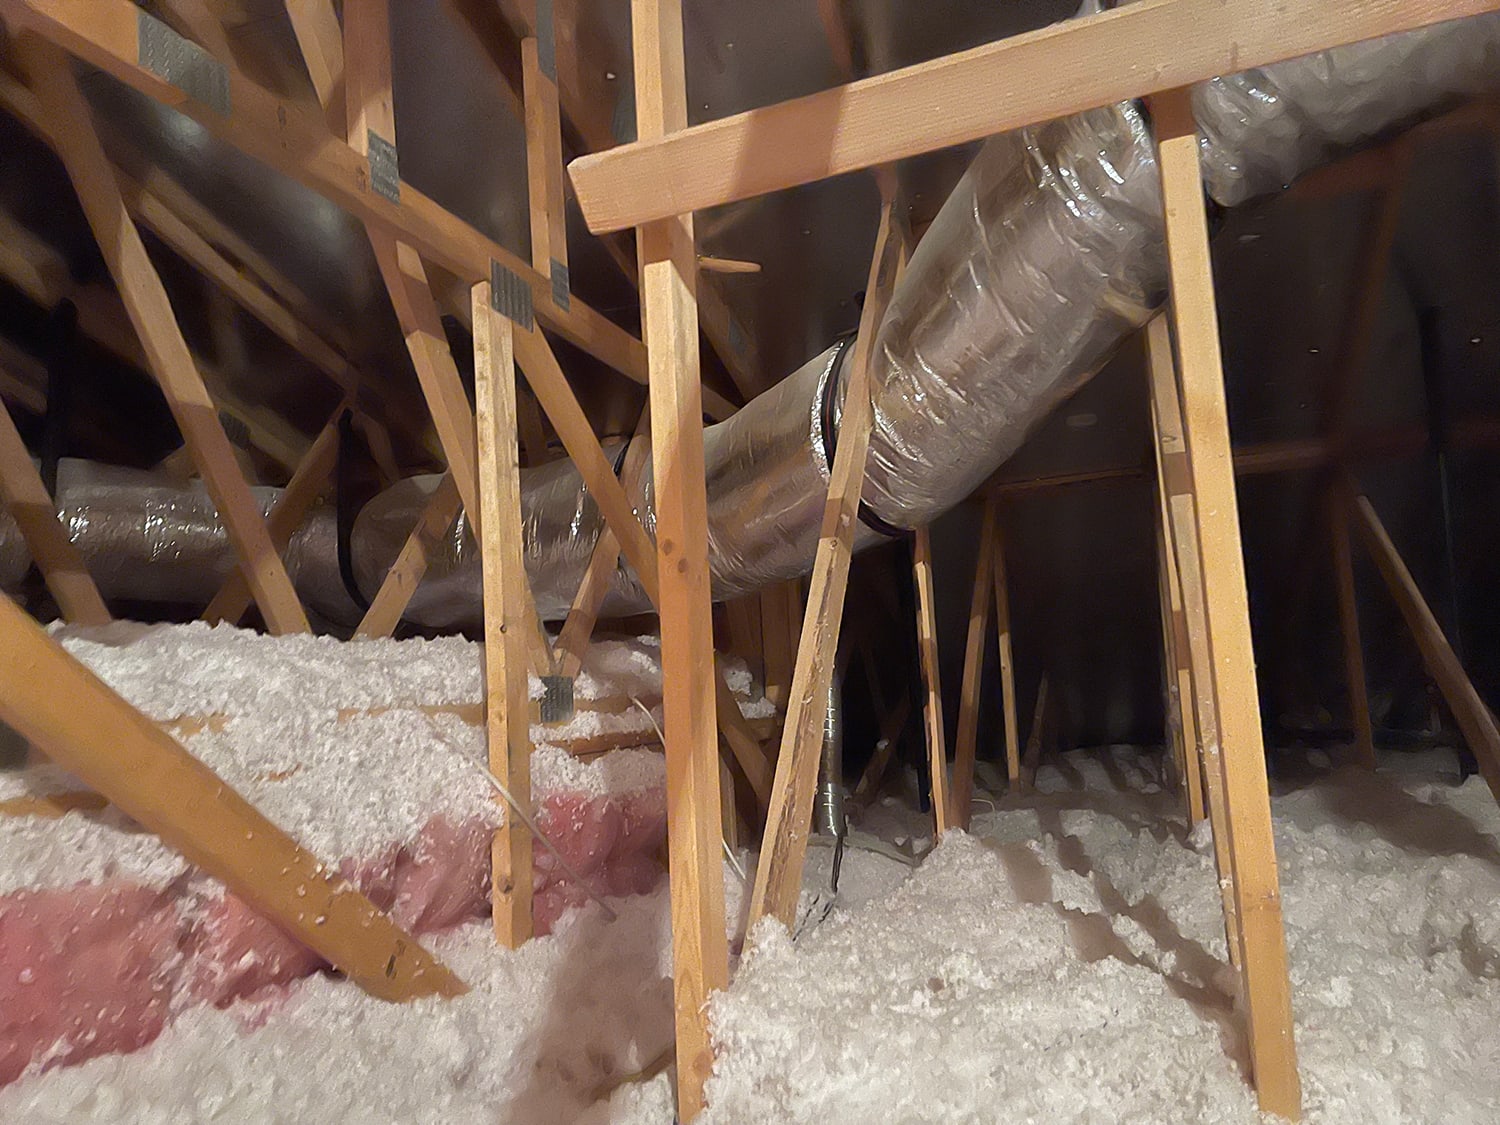 Ductwork in the attic